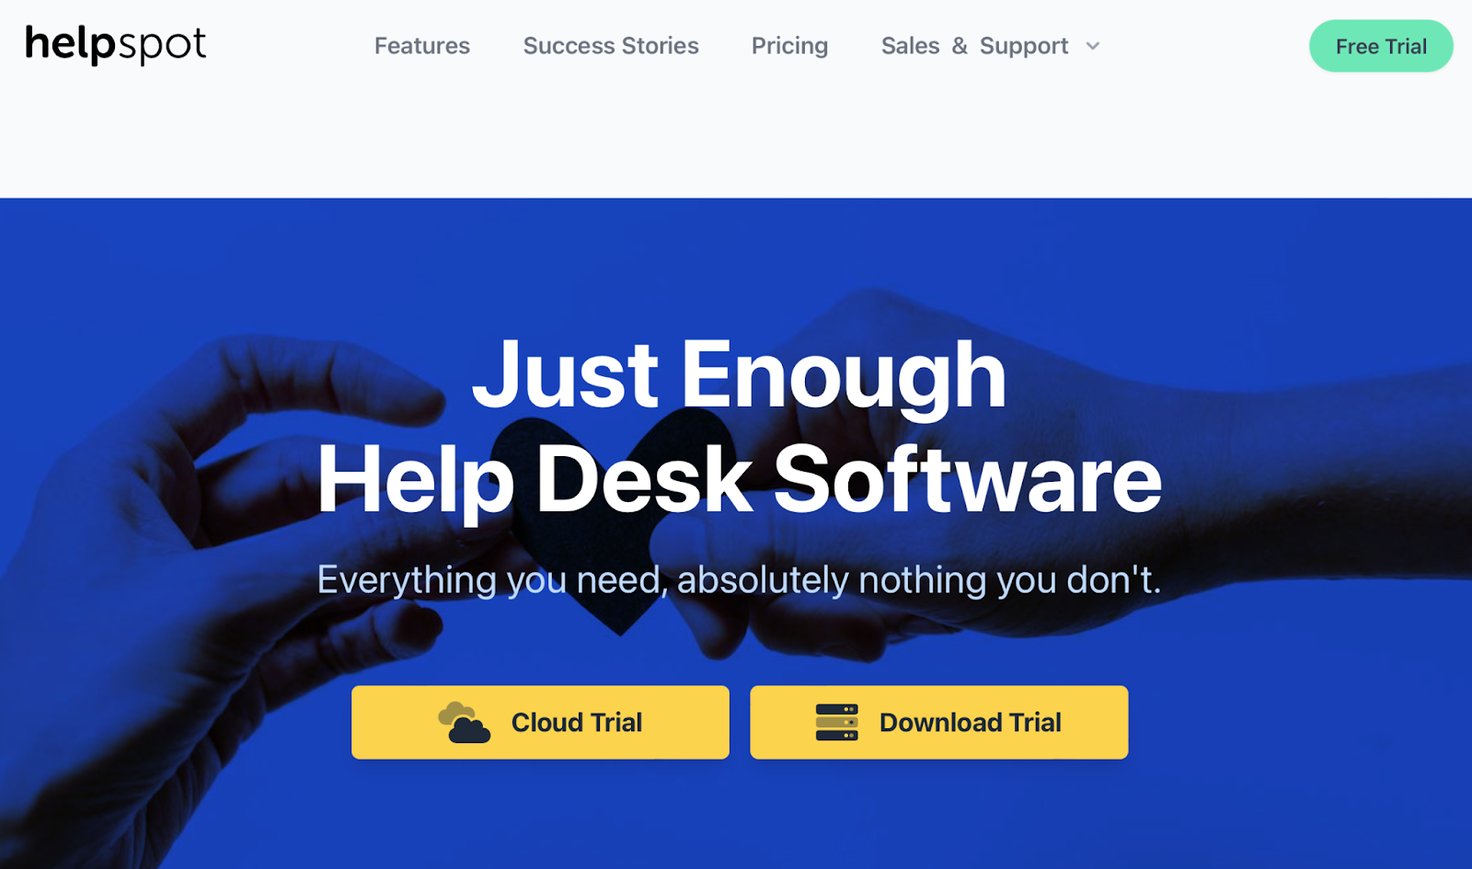 HelpSpot homepage: Just Enough Help Desk Software